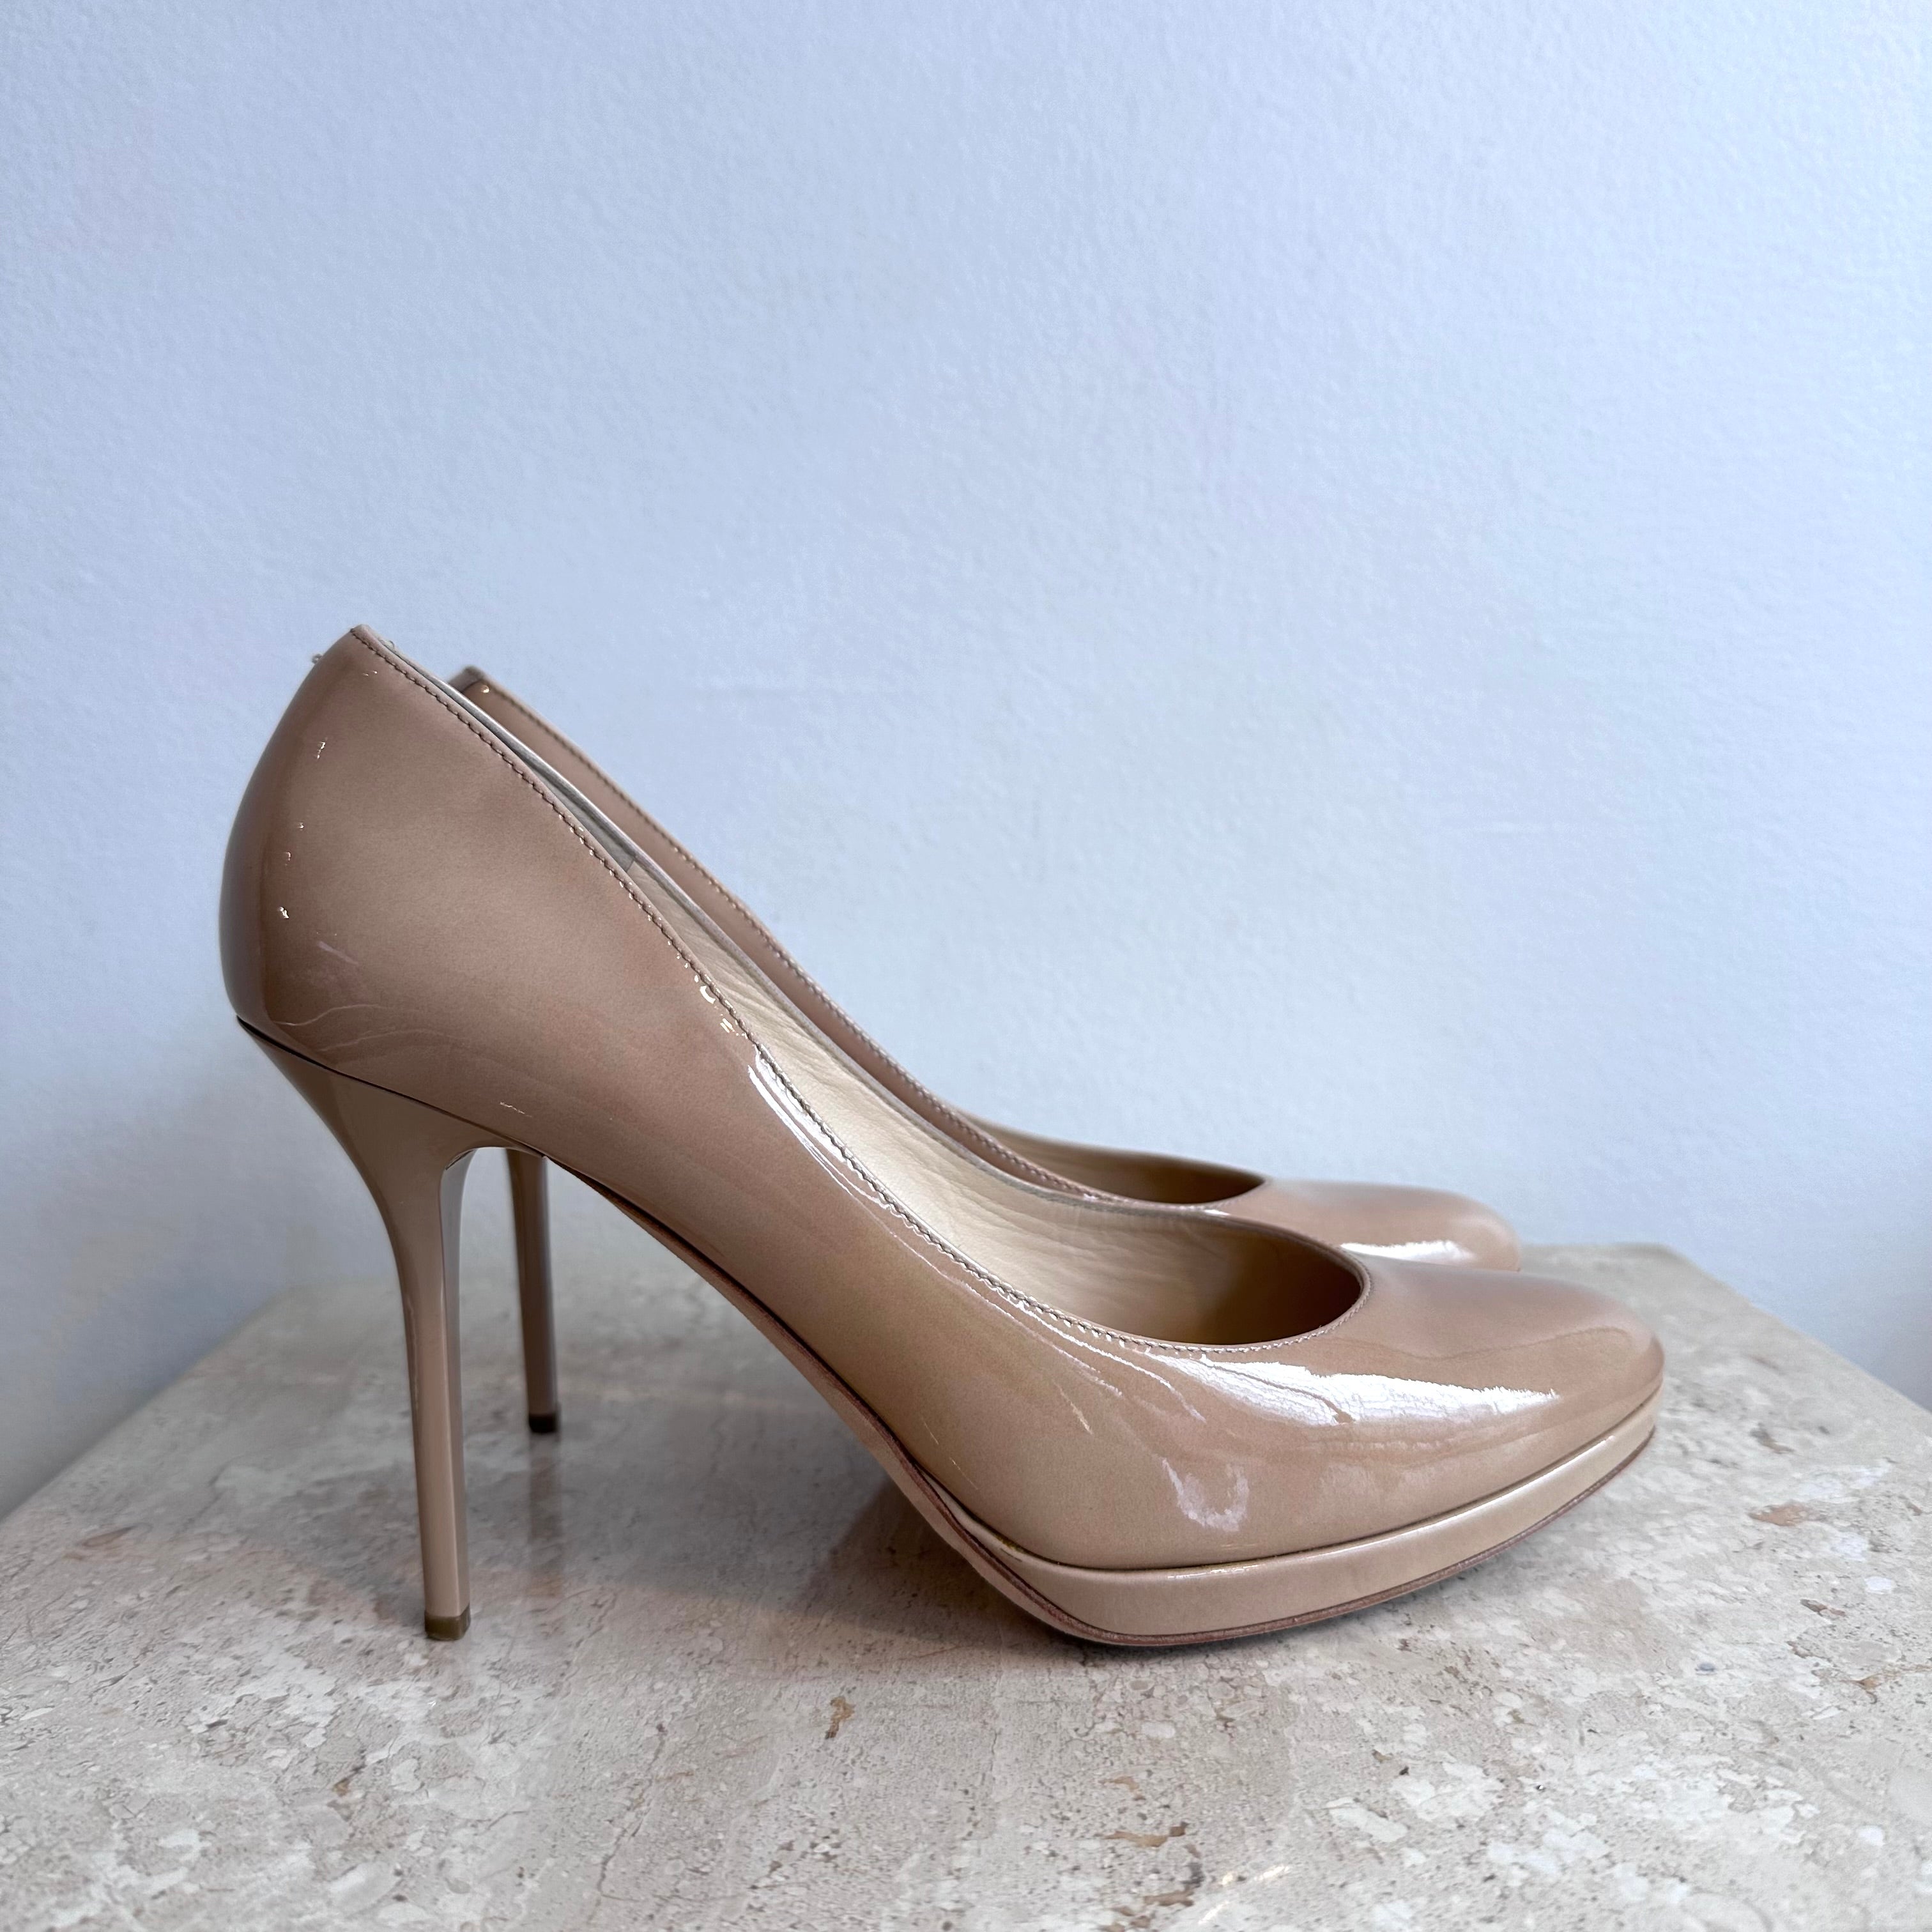 Pre-Owned JIMMY CHOO Cosmic Nude Pumps Size 39